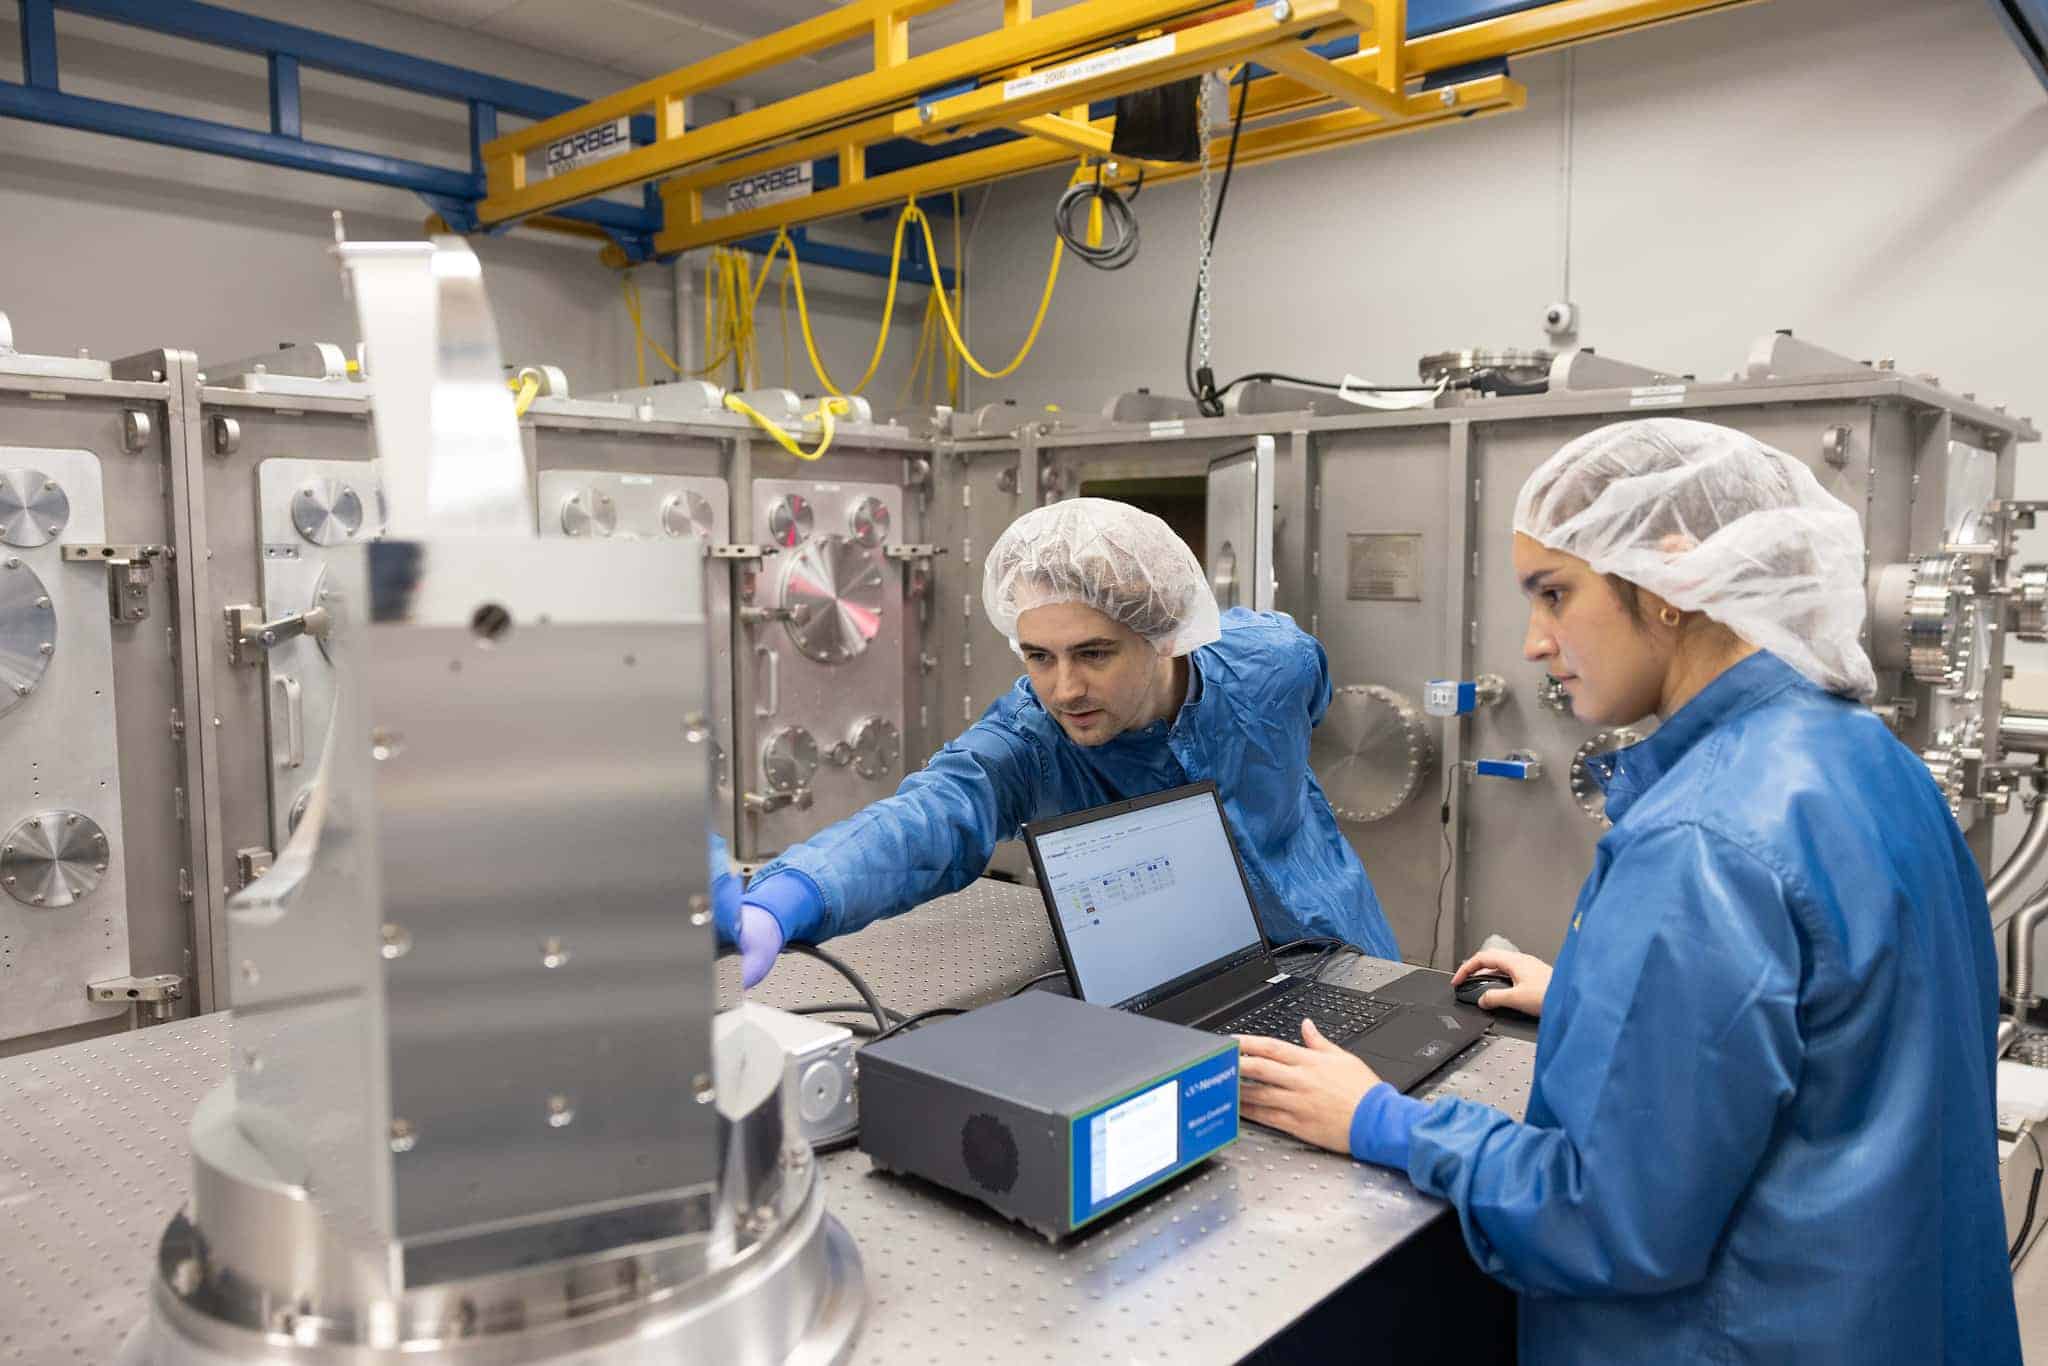 Two lab technicians in blue coats and hairnets work on a laptop next to a large metallic machine in a laboratory setting.